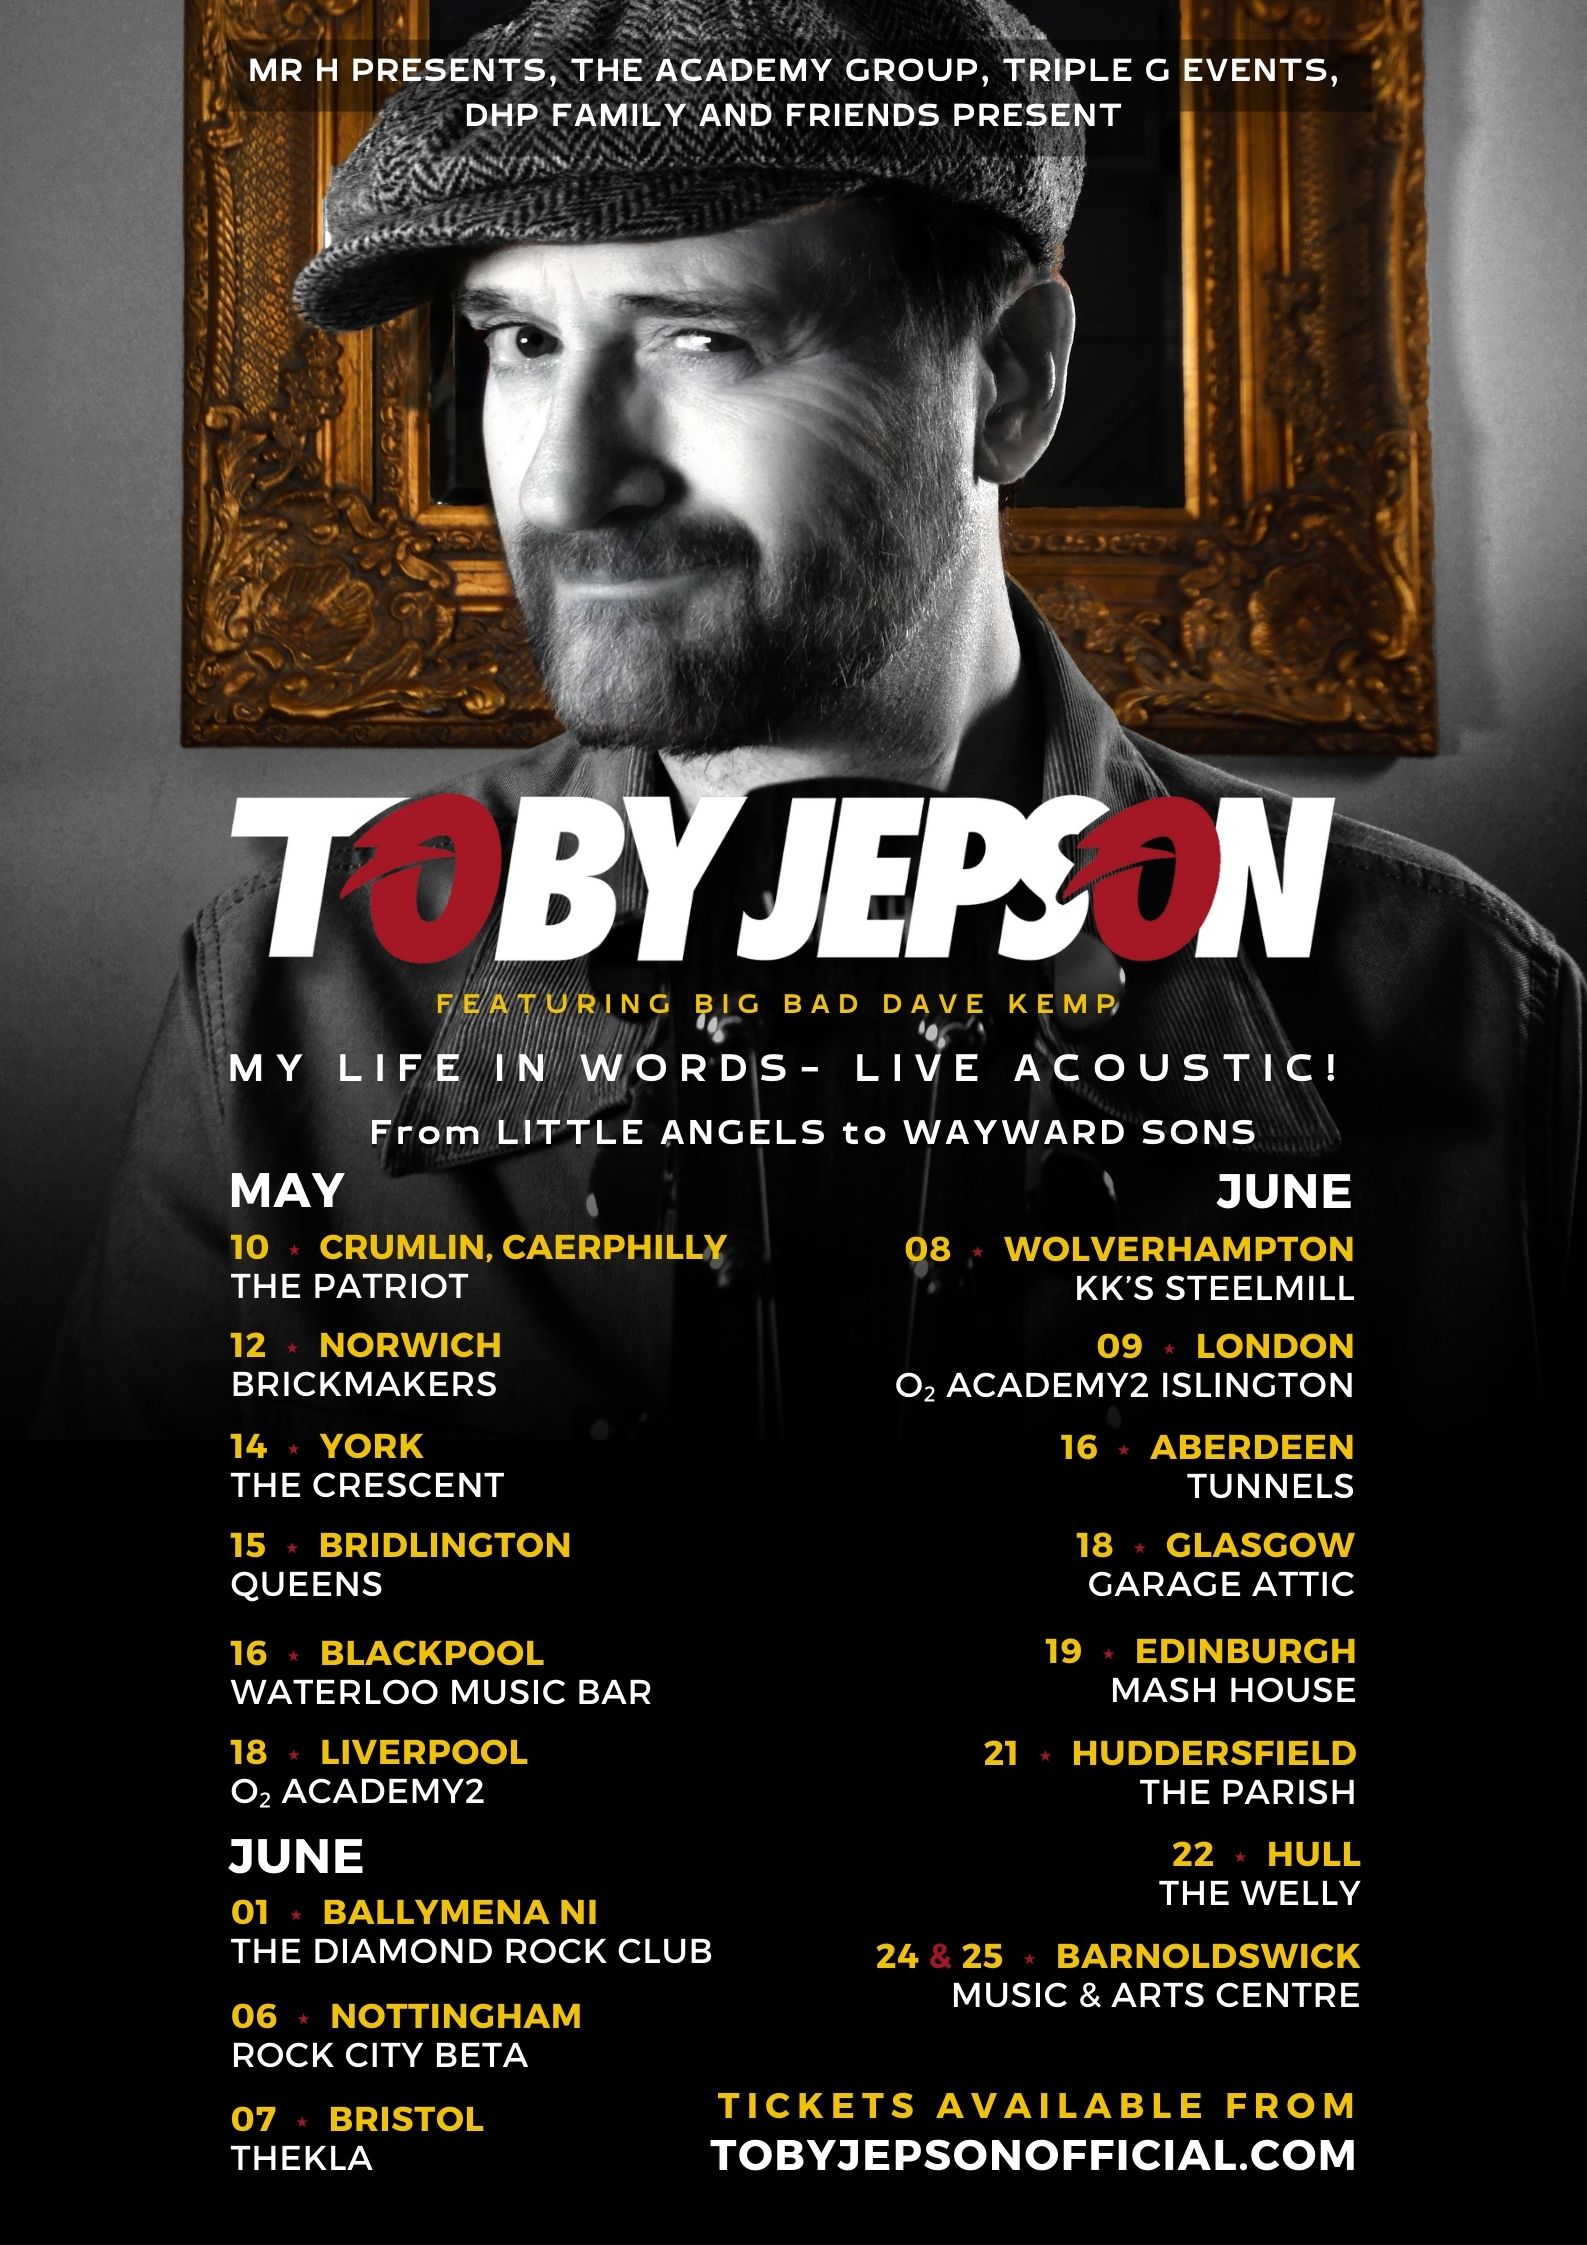 Former Little Angels frontman and Planet ROck DJ, Wayward Sons singer and songwriter Toby Jepson is on tour this May/June